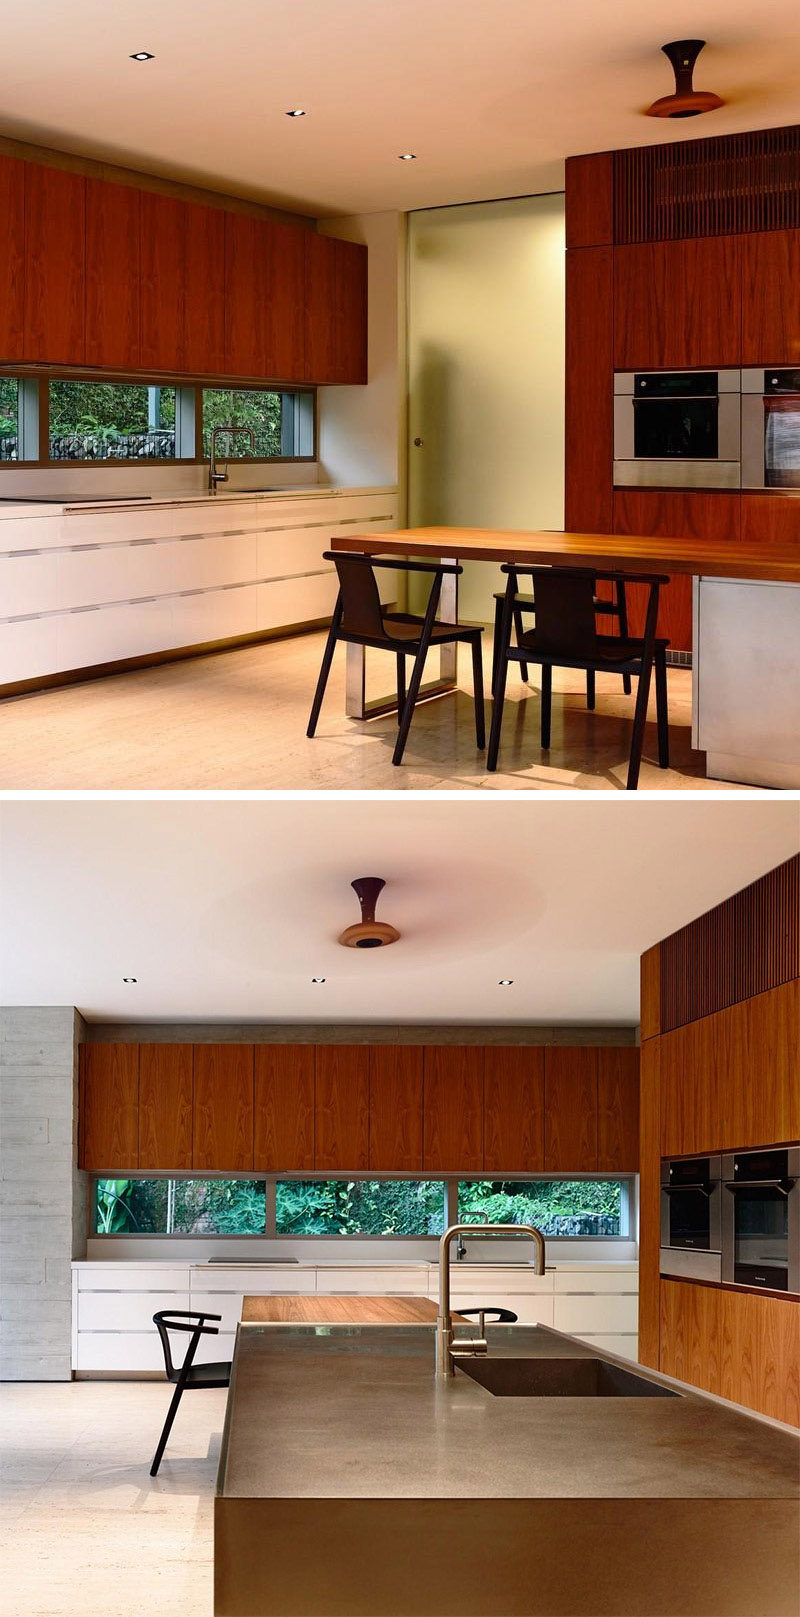 Interior Design Ideas - Hide The Air-Conditioning Unit Inside A Cabinet